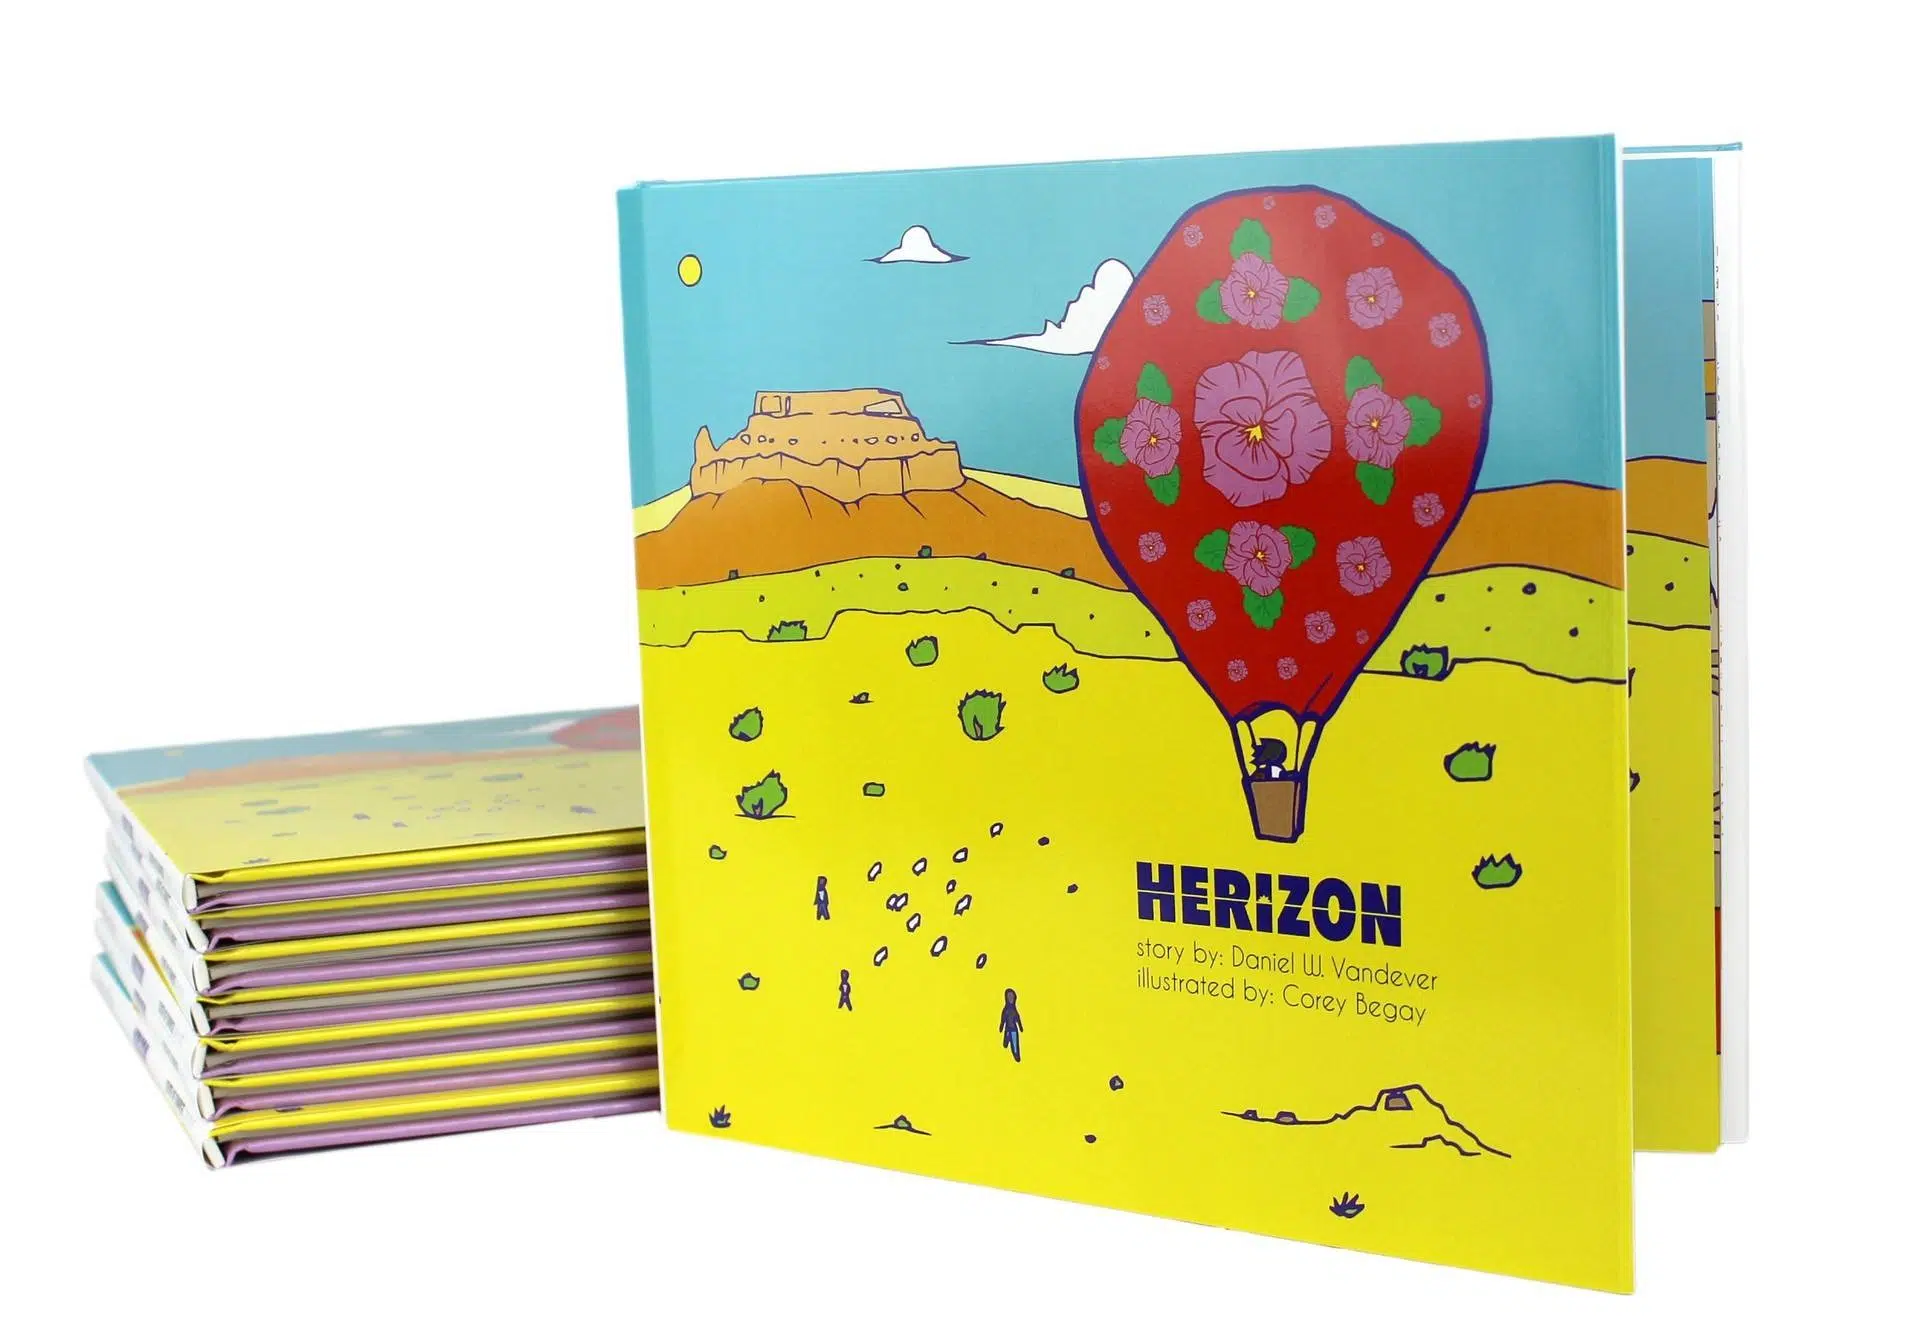 A hardcover print-on-demand book with a cover illustration of a balloon flying over a desert.